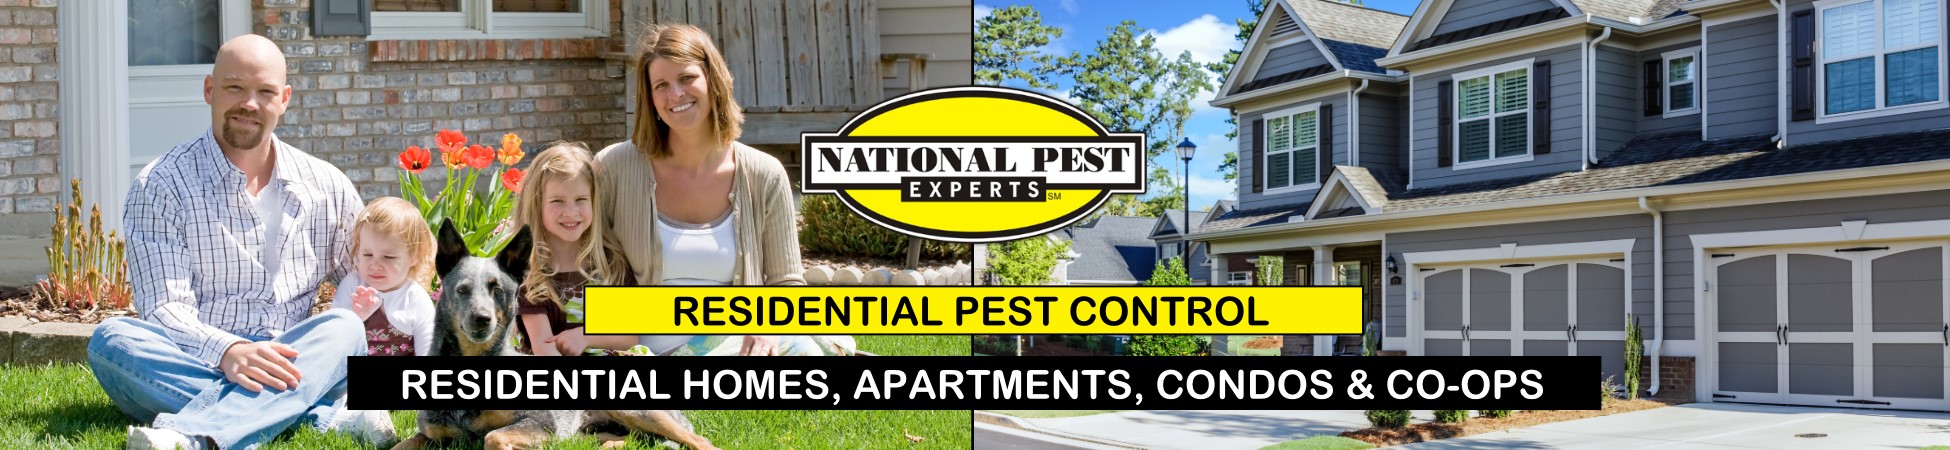 National Pest Experts - Residential exterminating and pest control in Hauppauge, NY